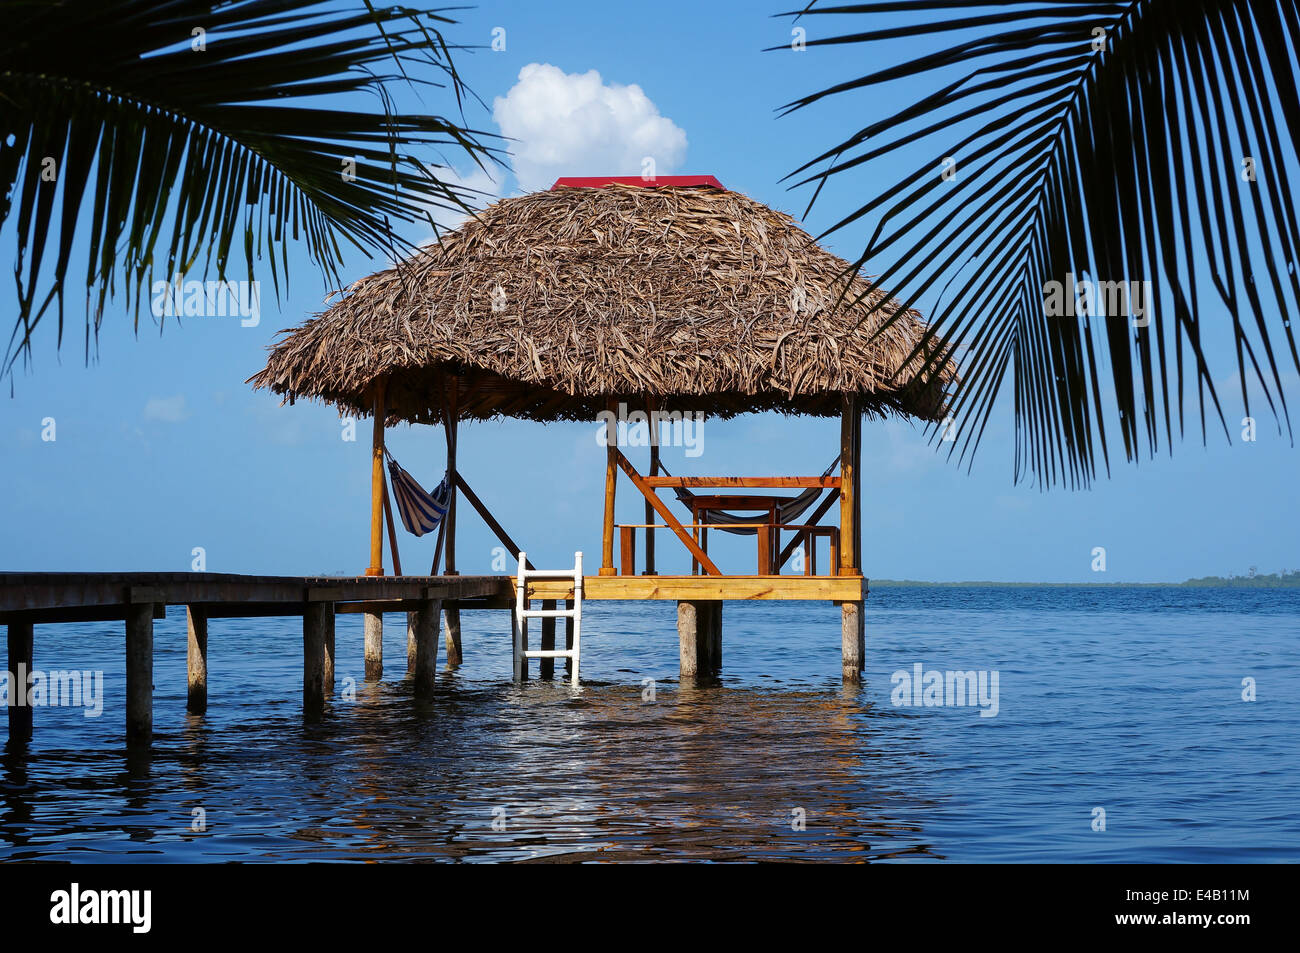 Palapa hut overwater with thatched roof made of dried palm leaves, Caribbean sea Stock Photo